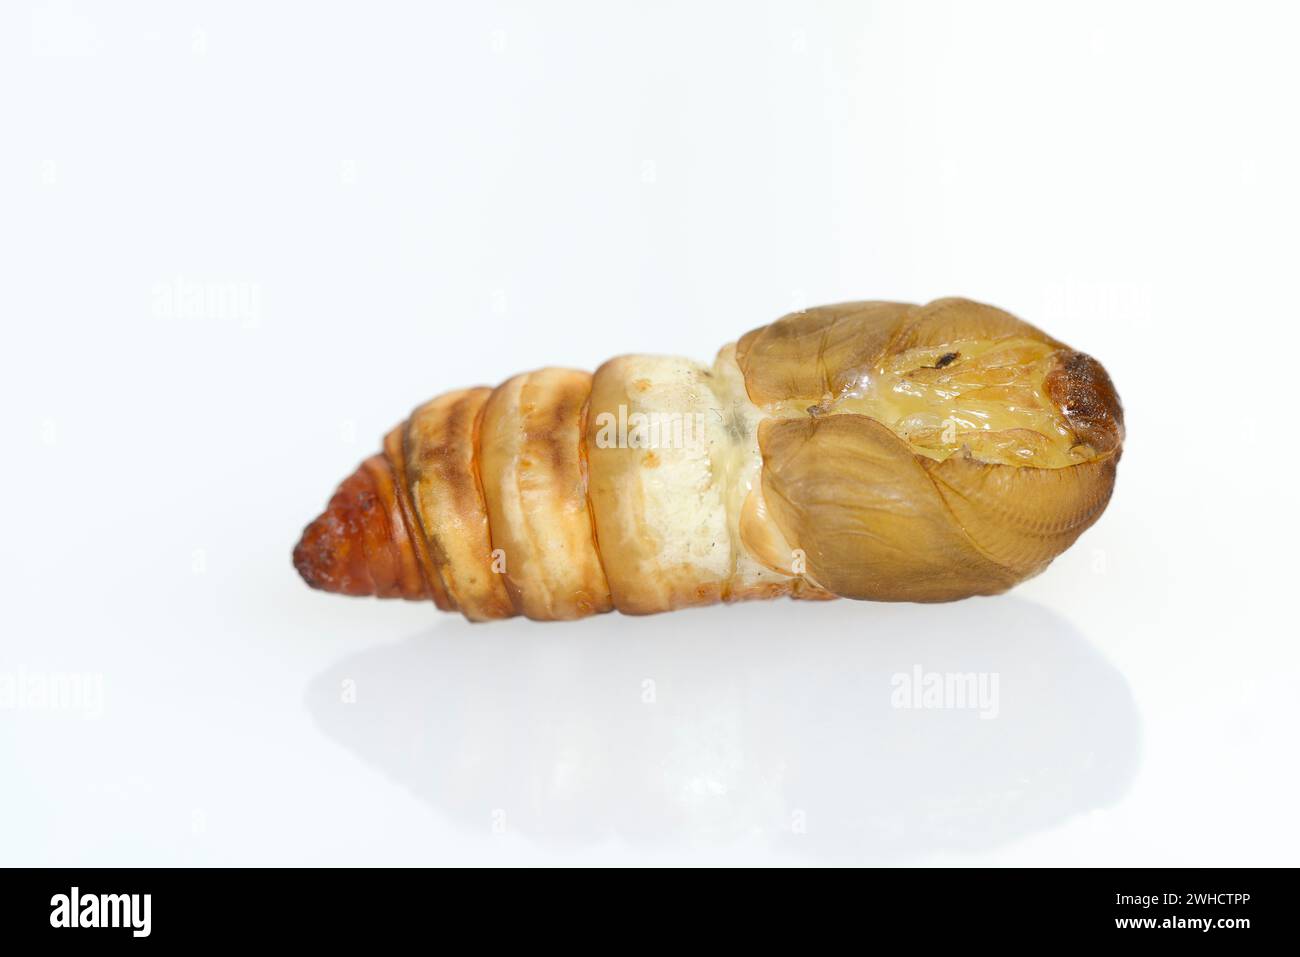 Tree of God spinner or Ailanthus spinner (Samia cynthia), pupa Stock Photo